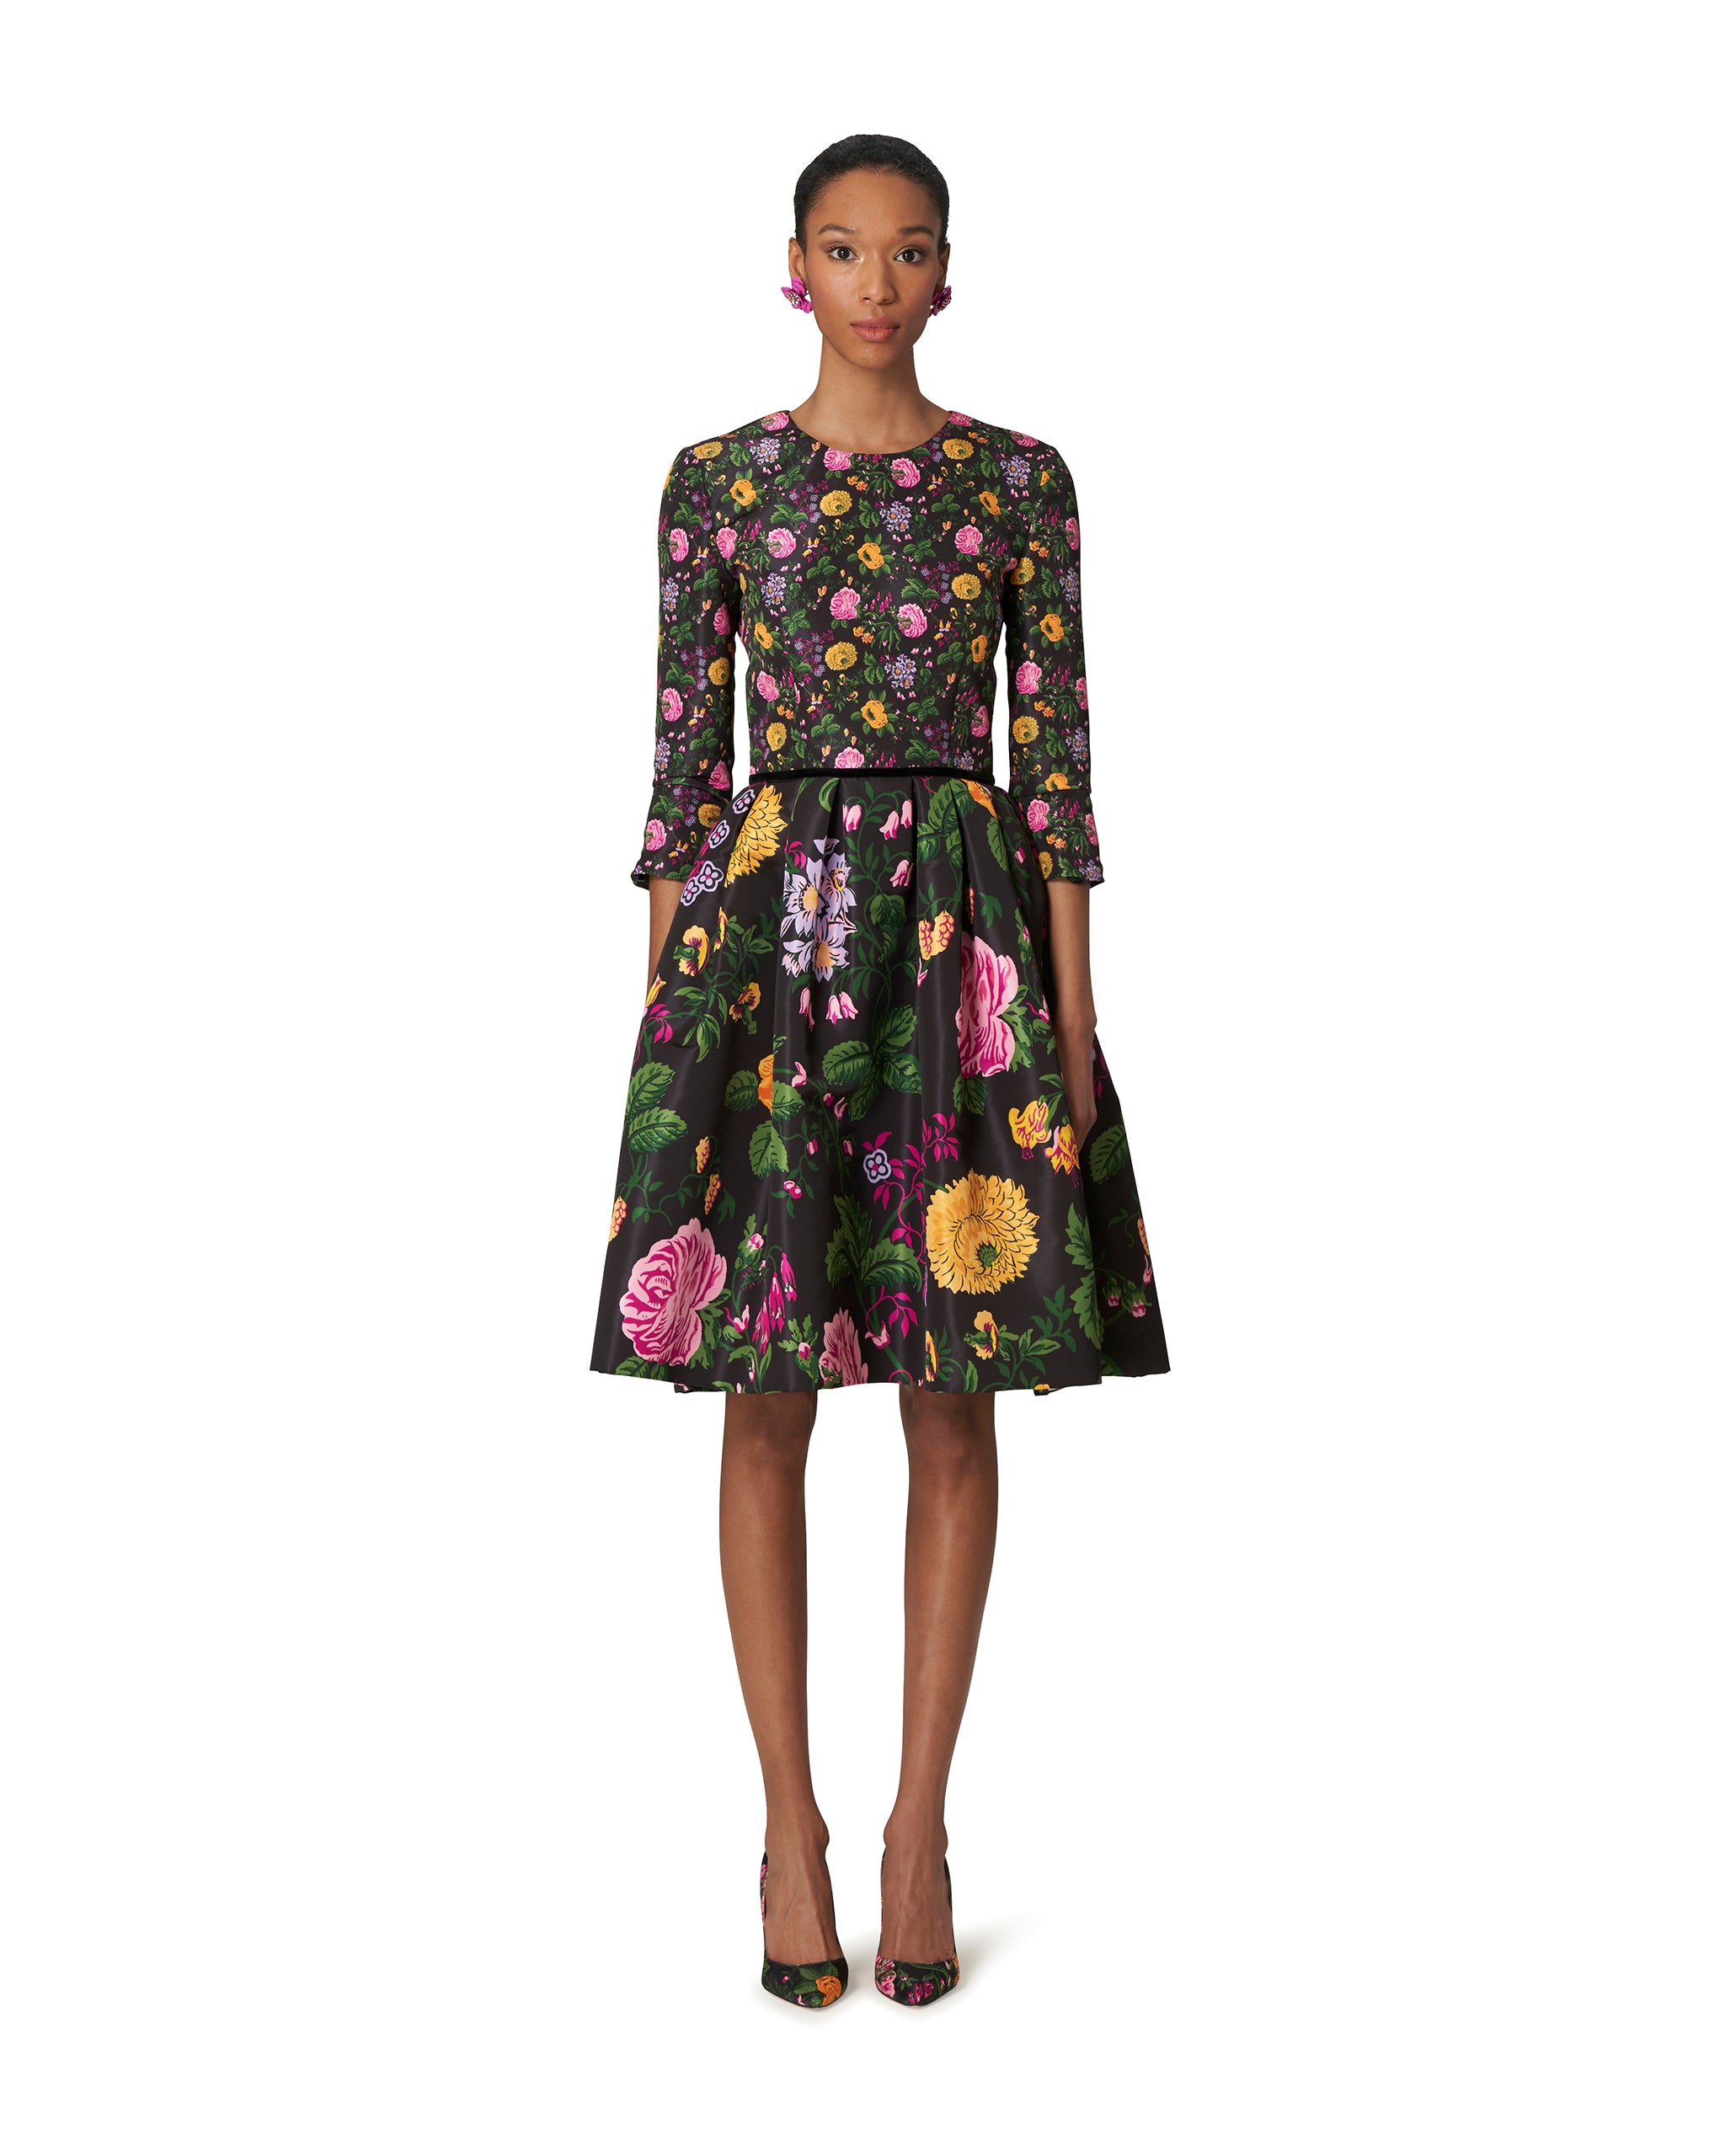 MIXED FLORAL FULL SKIRT COCKTAIL DRESS